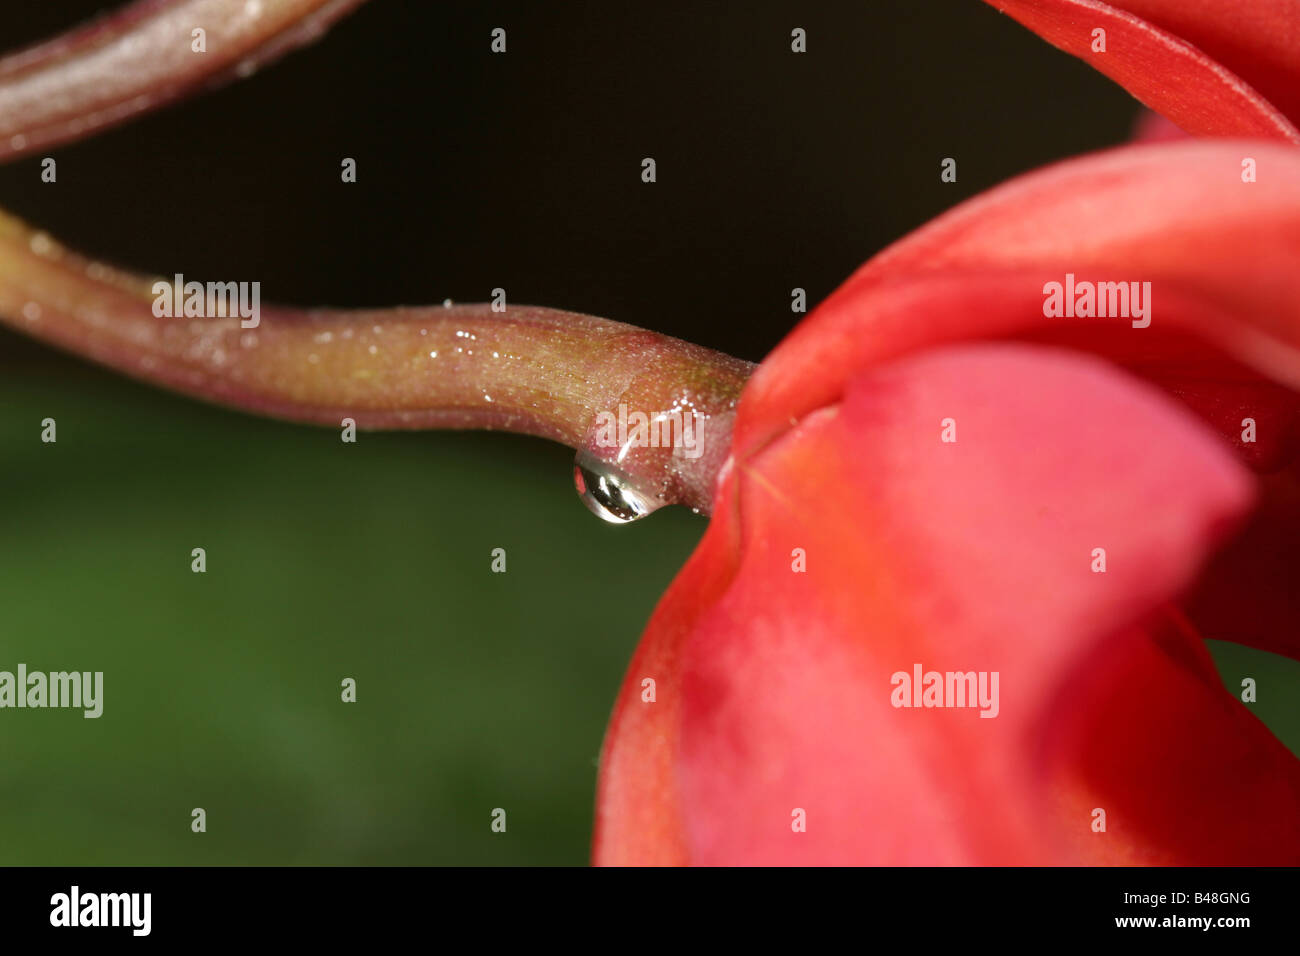 A water droplet on the stem of a red flower Stock Photo - Alamy